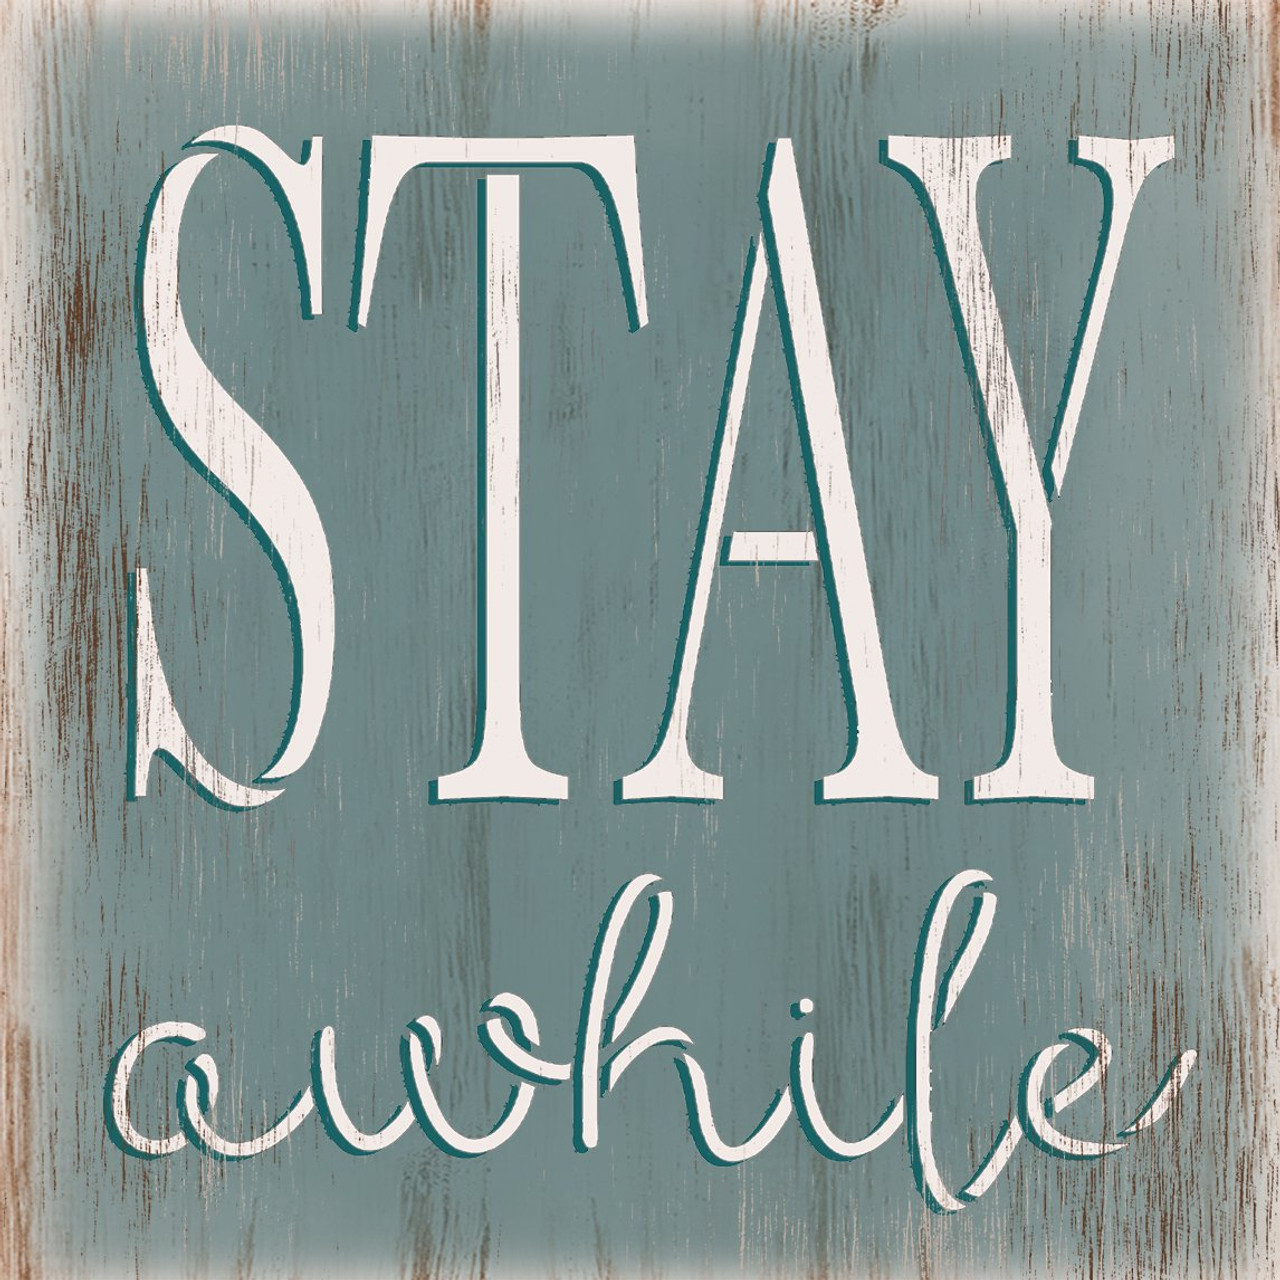 Stay Awhile Rustic Word Art Stencil by StudioR12 - Select Size - USA Made - Craft DIY Boho Farmhouse Living Room Decor | Paint Rustic Wood Sign Pallet